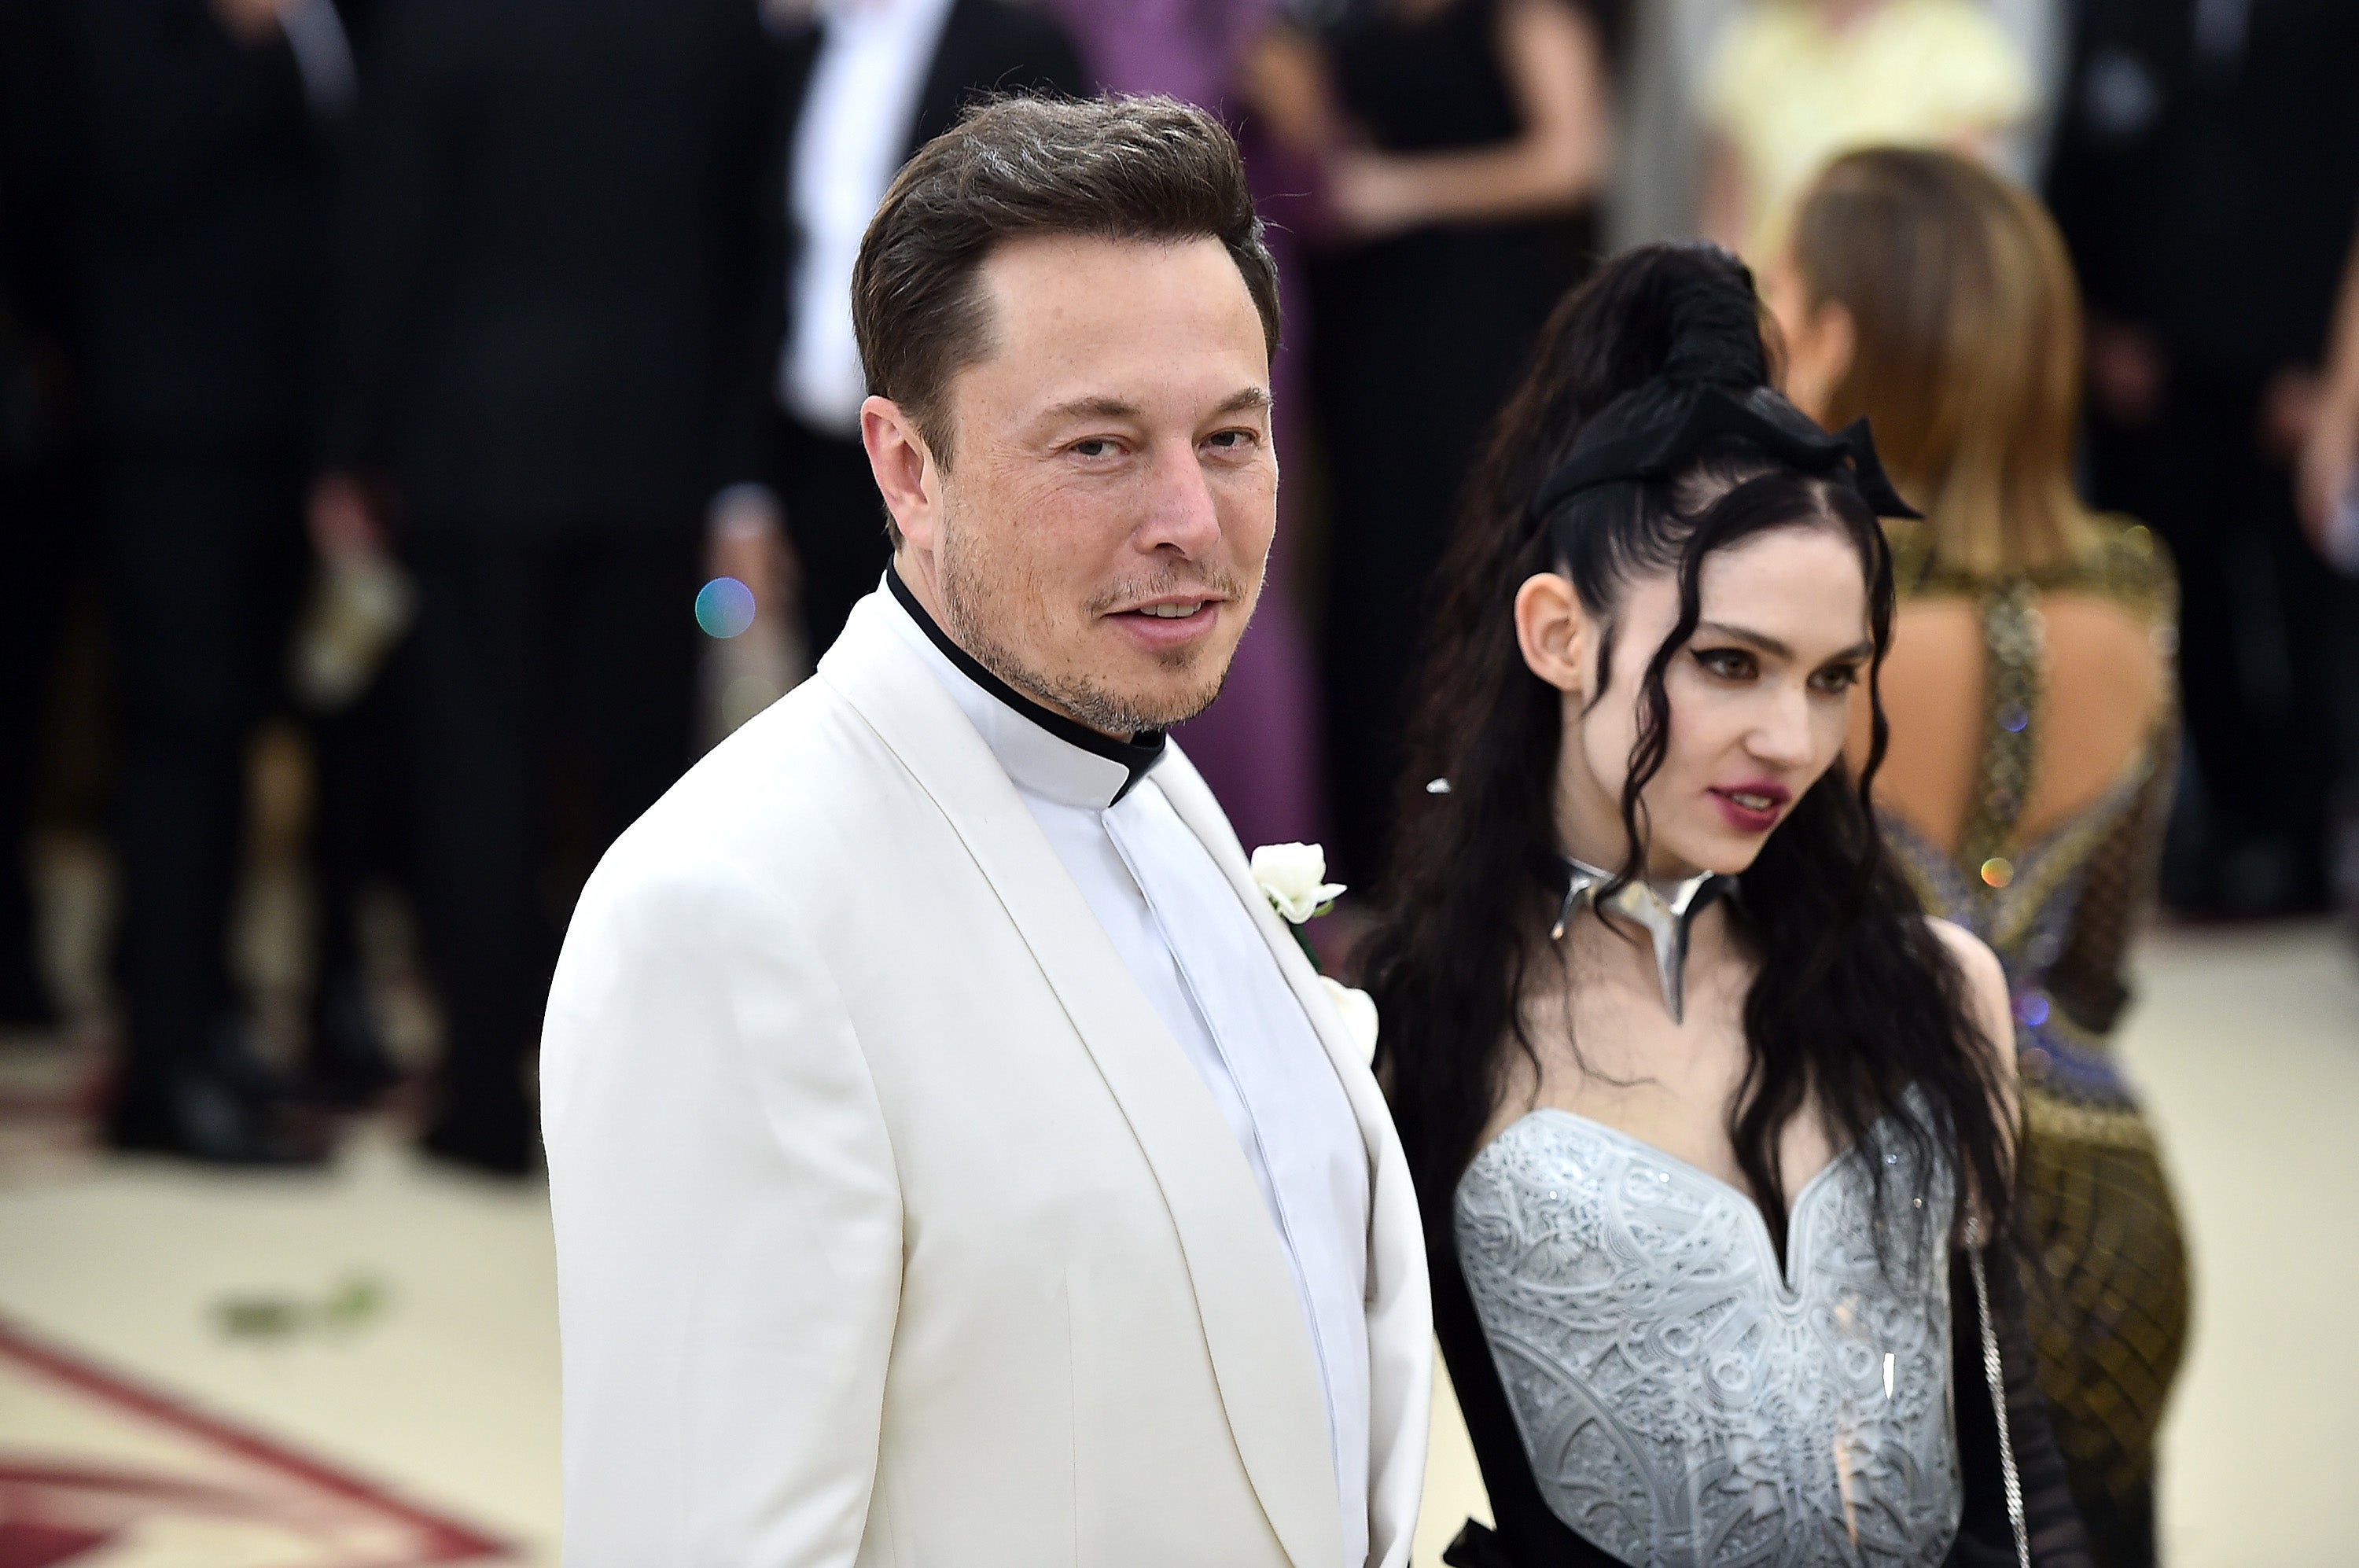 Elon Musk and Grimes at the 2018 Met Gala